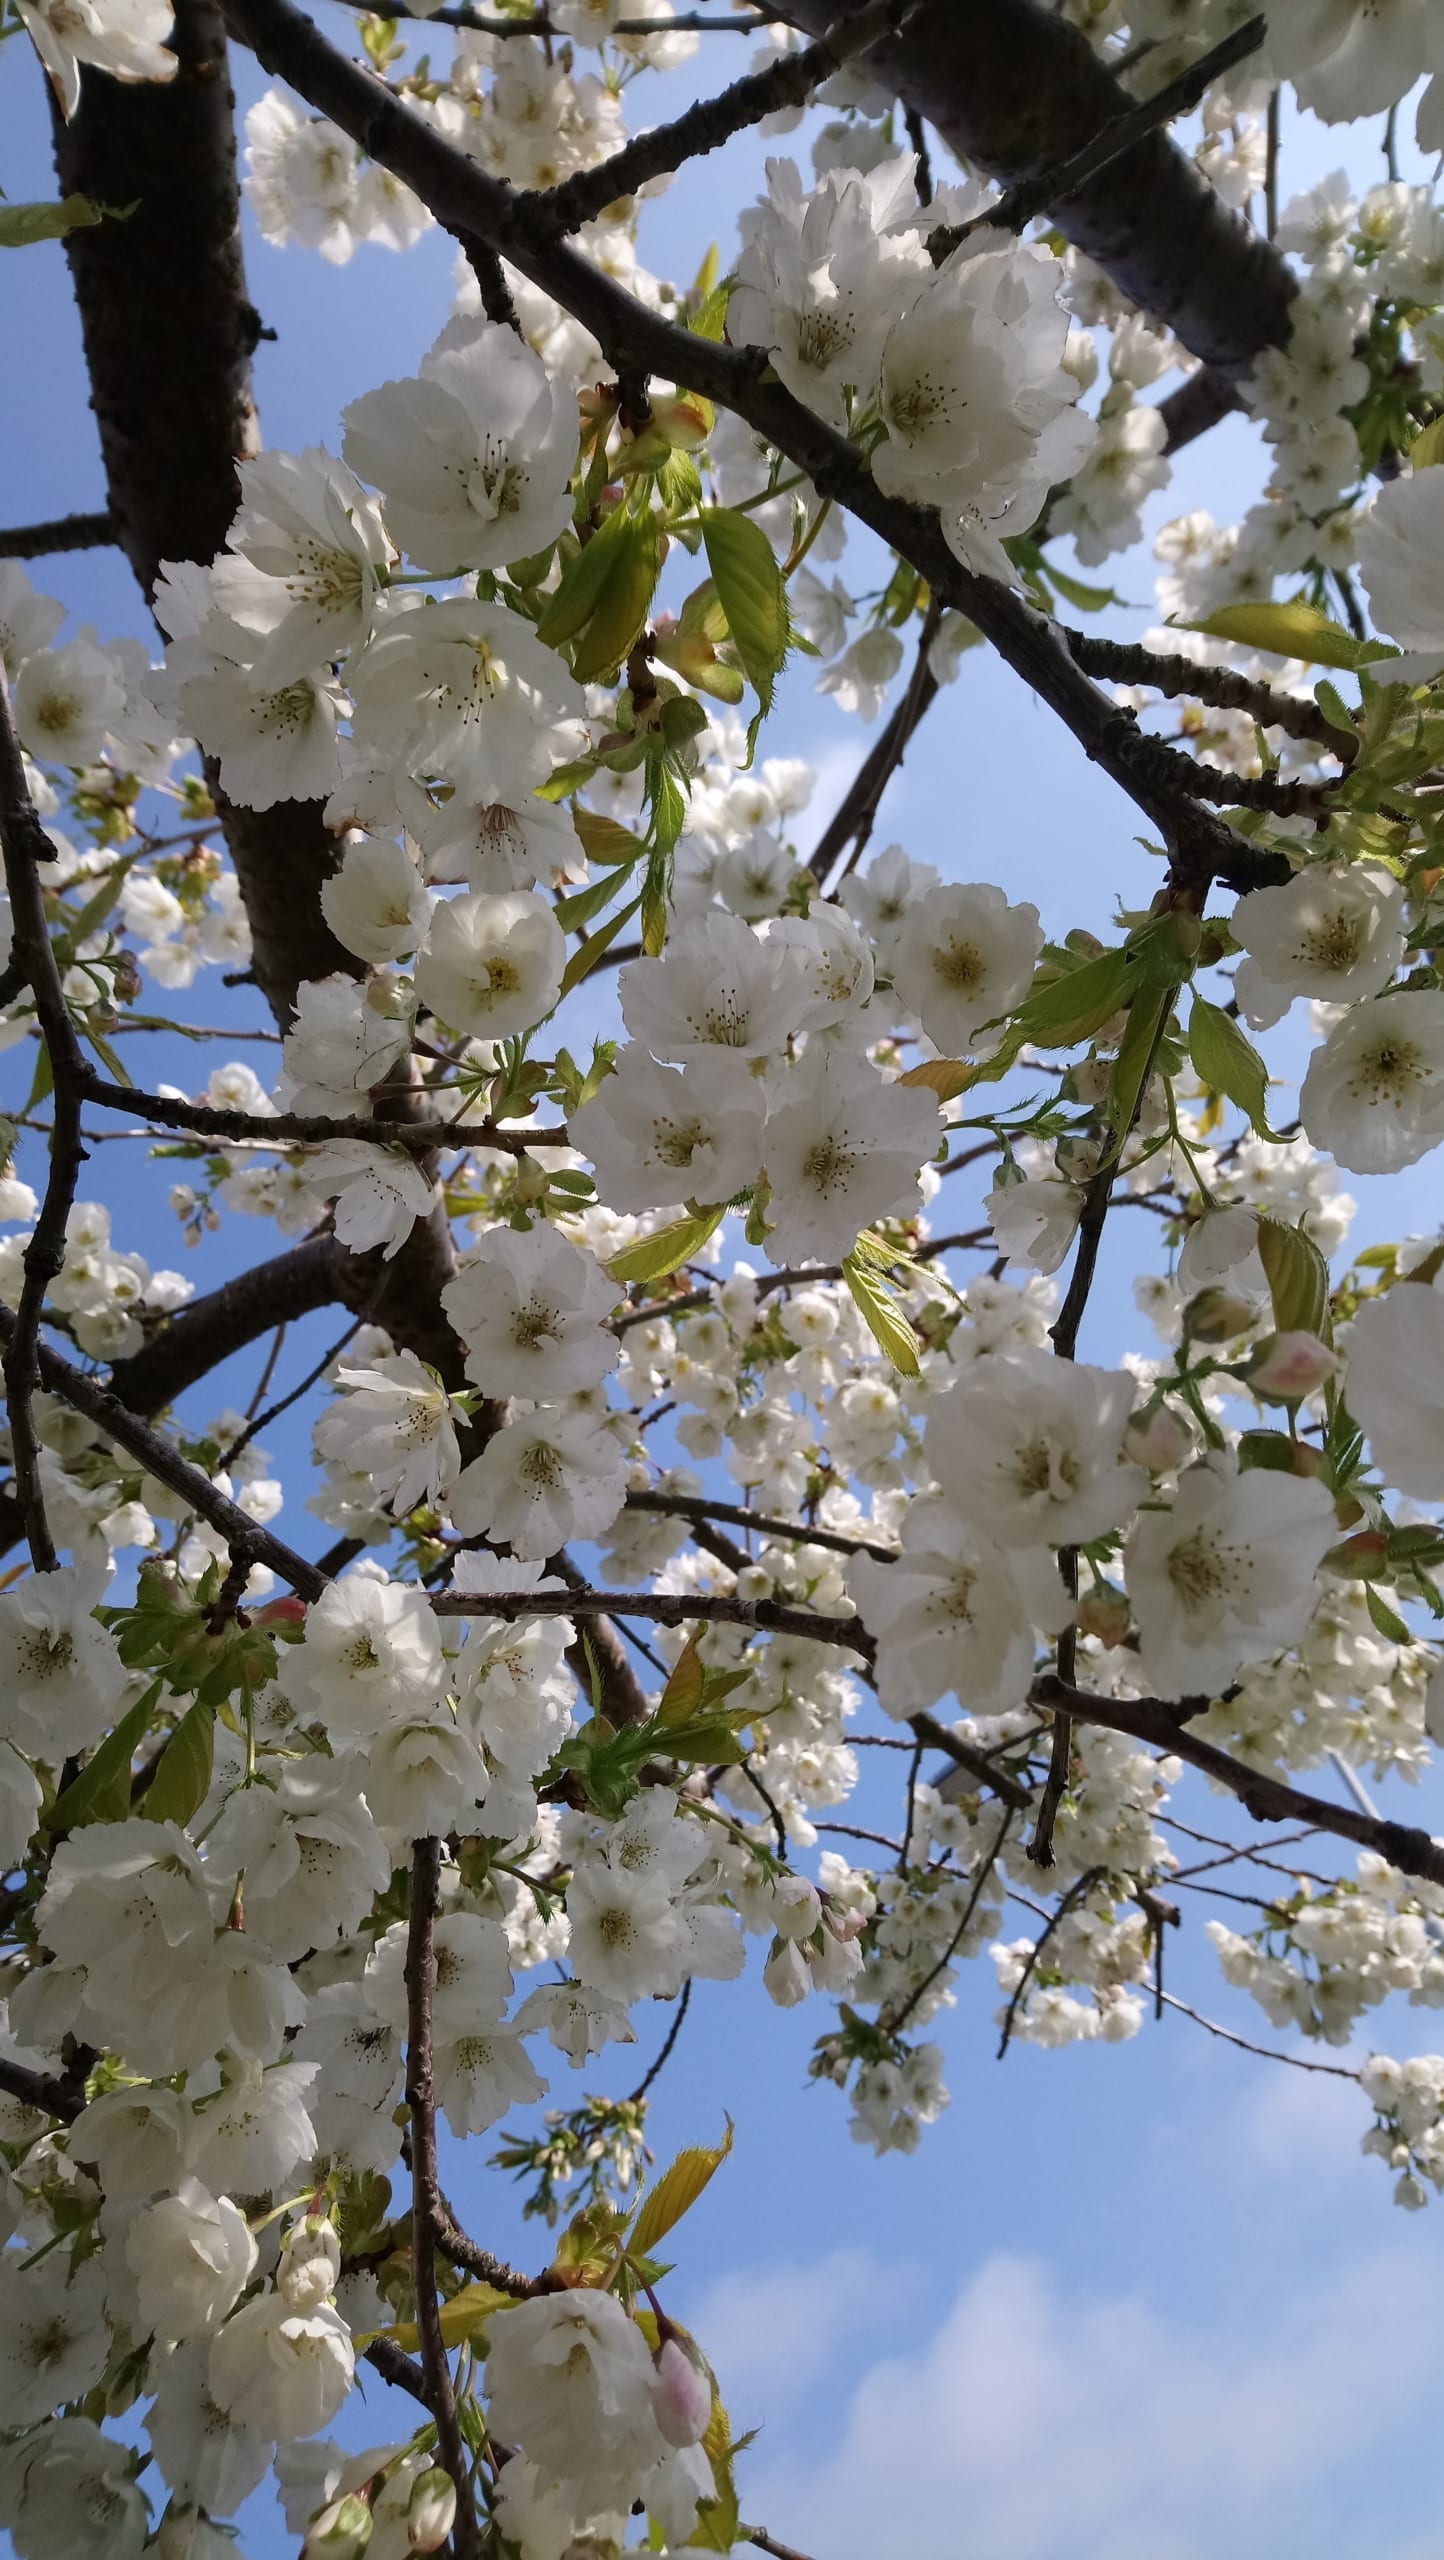 An image of white cherry blossom